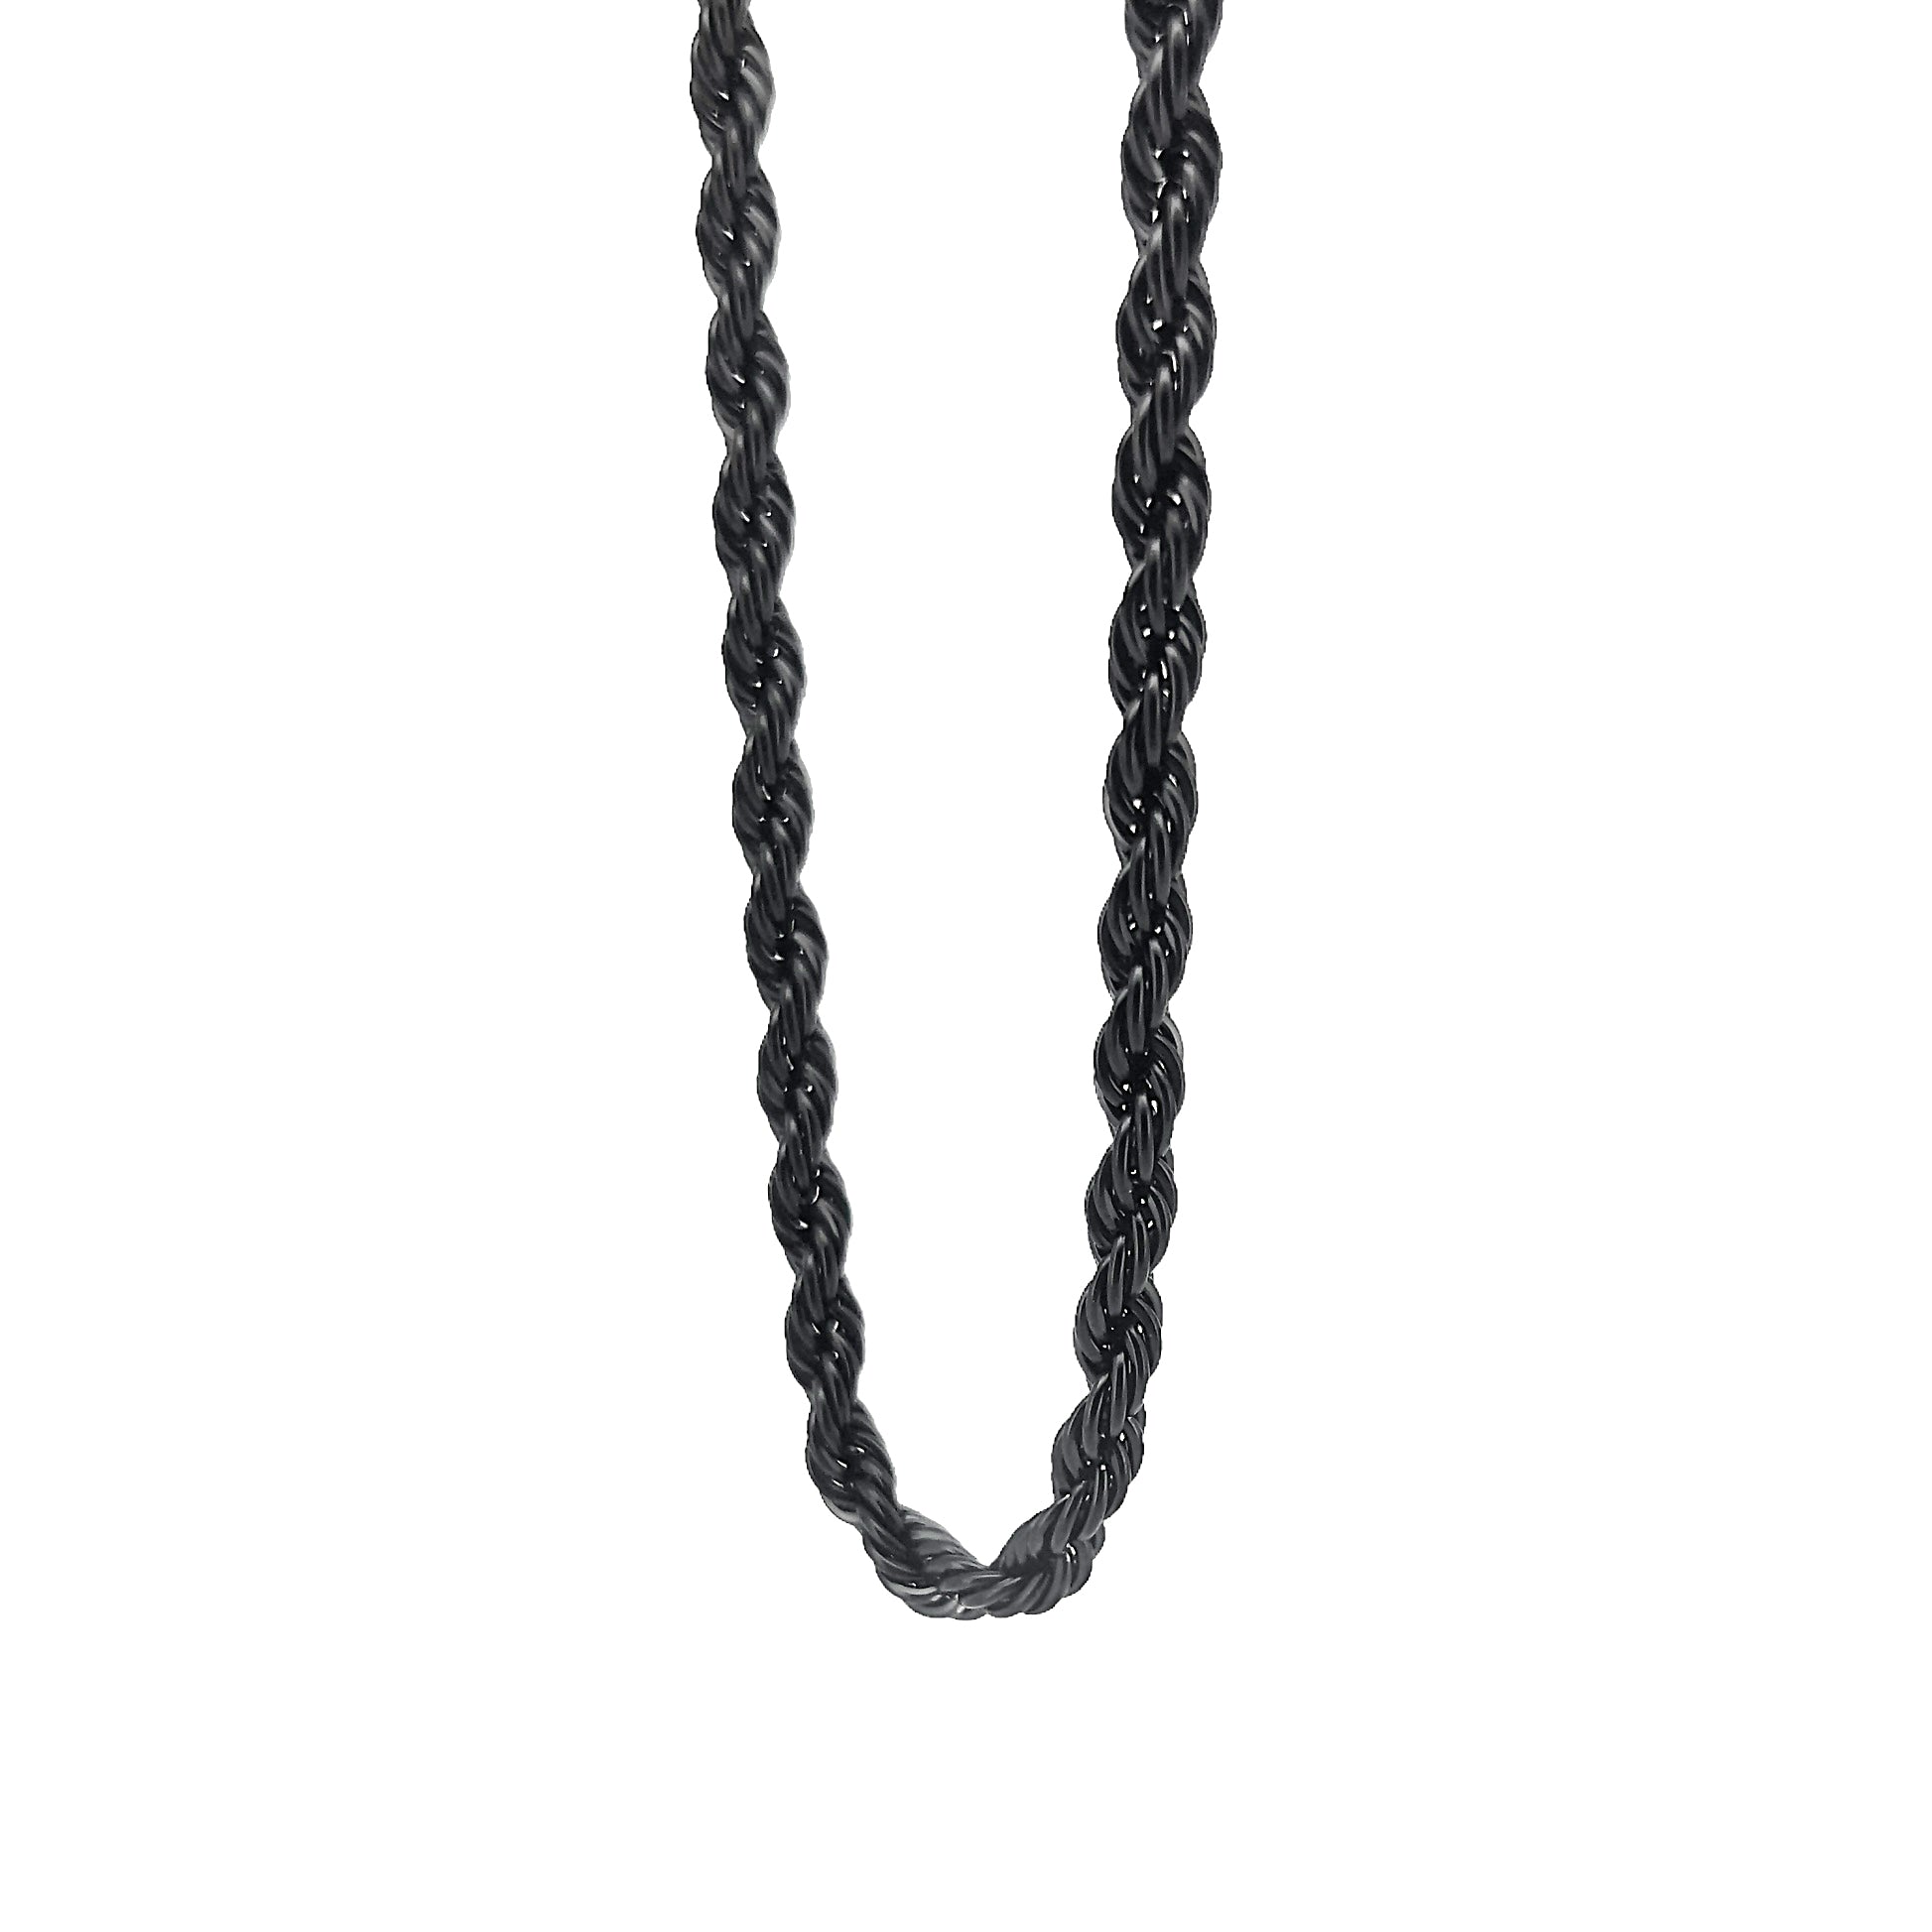 Isaiah Stainless Steel Rope Chain Necklace